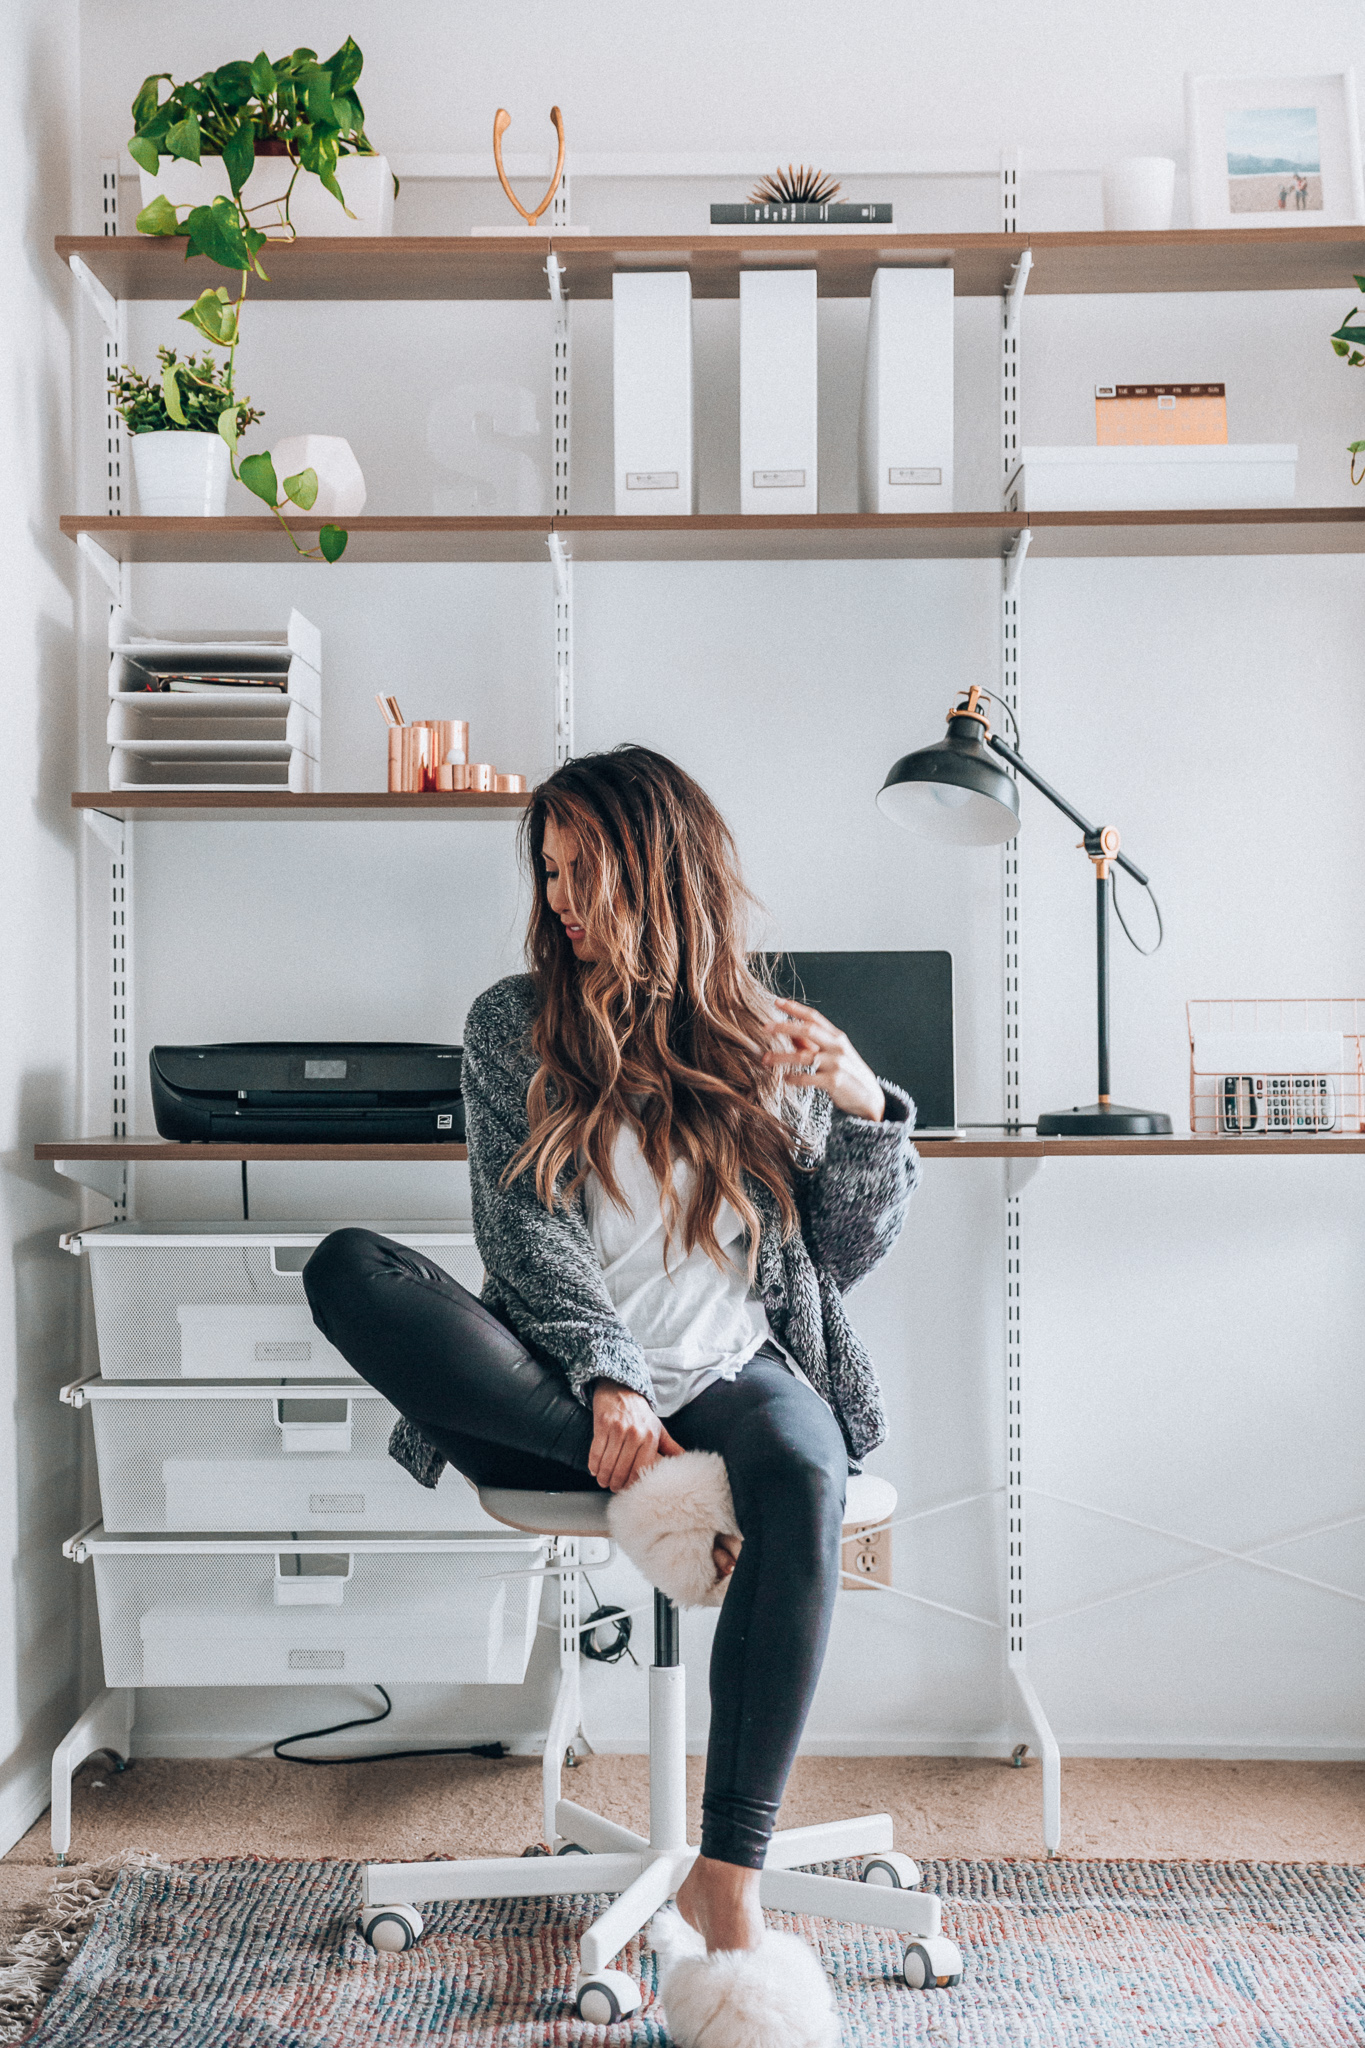 Modern & Fresh Home Office Space Ideas featured by top US lifestyle blog, The Girl in the Yellow Dress: image of a woman sitting on an IKEA office chair by a Container Store freestanding desk